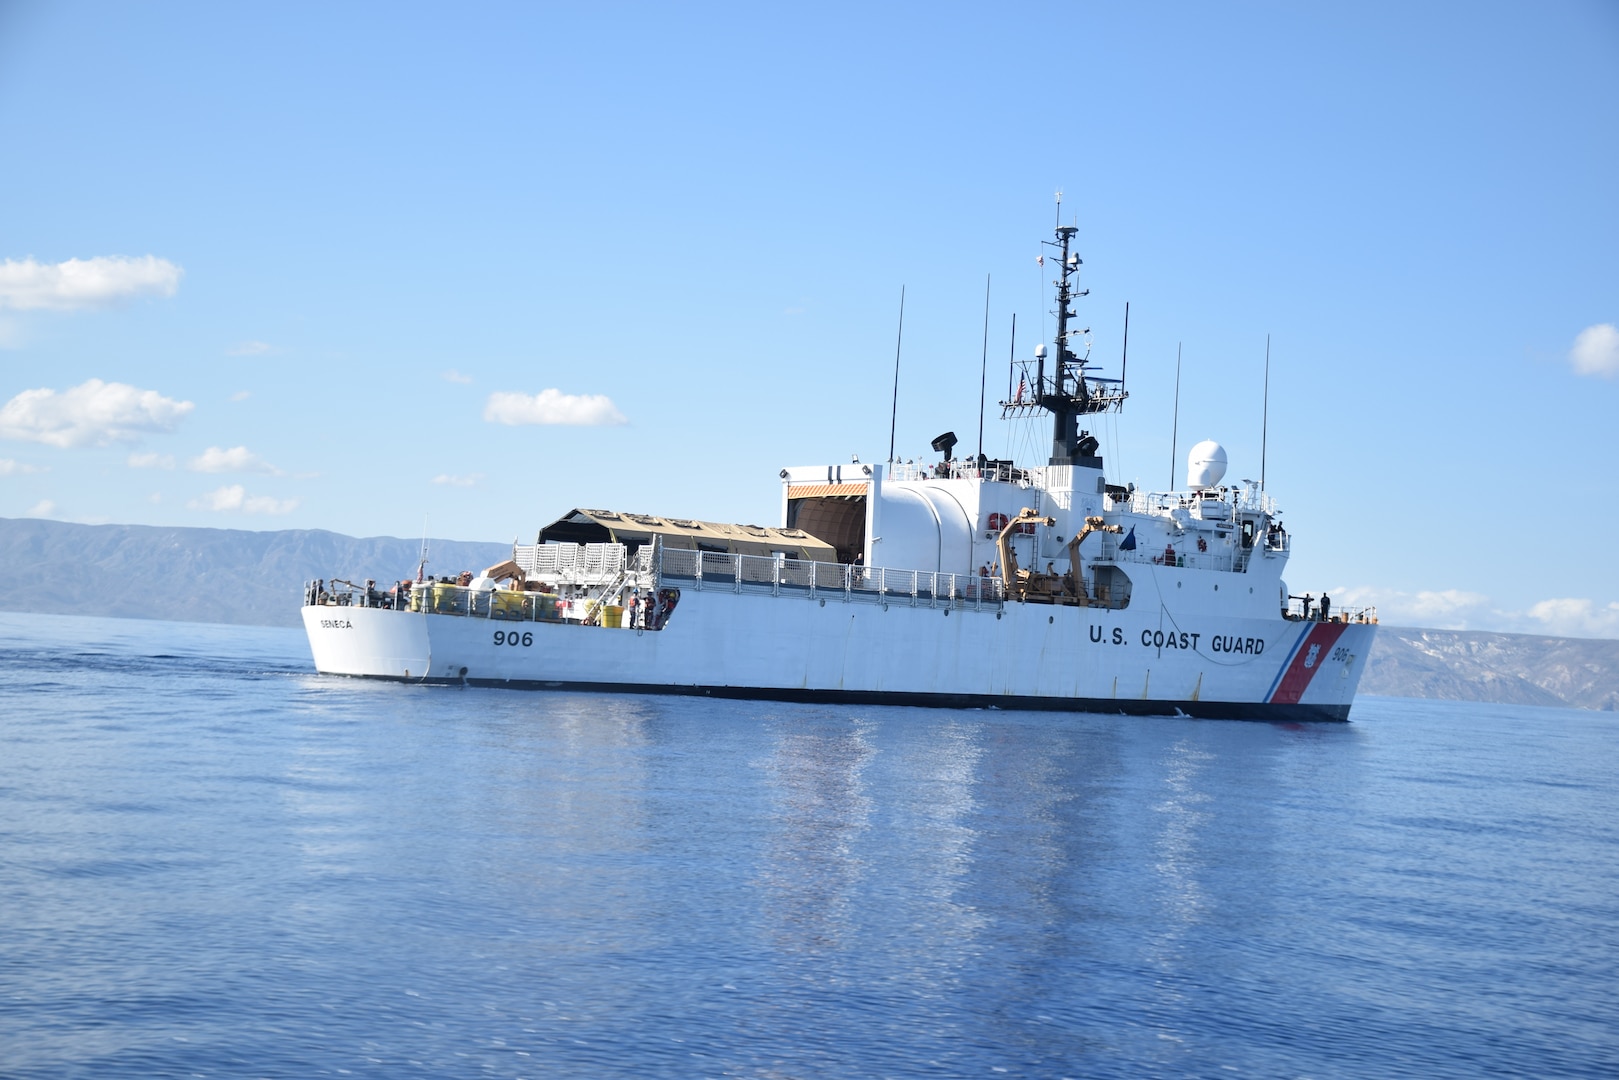 U.S. Coast Guard Cutter Seneca (WMEC 906) patrols off the coast of Haiti, April 13, 2024, during a deployment to the Windward Passage. The crew of Seneca completed a 58-day patrol in the Windward Passage and Florida Straits to deter illegal migration while supporting Homeland Security Task Force – Southeast (HSTF-SE) and Operation Vigilant Sentry (OVS). (U.S. Coast Guard photo)